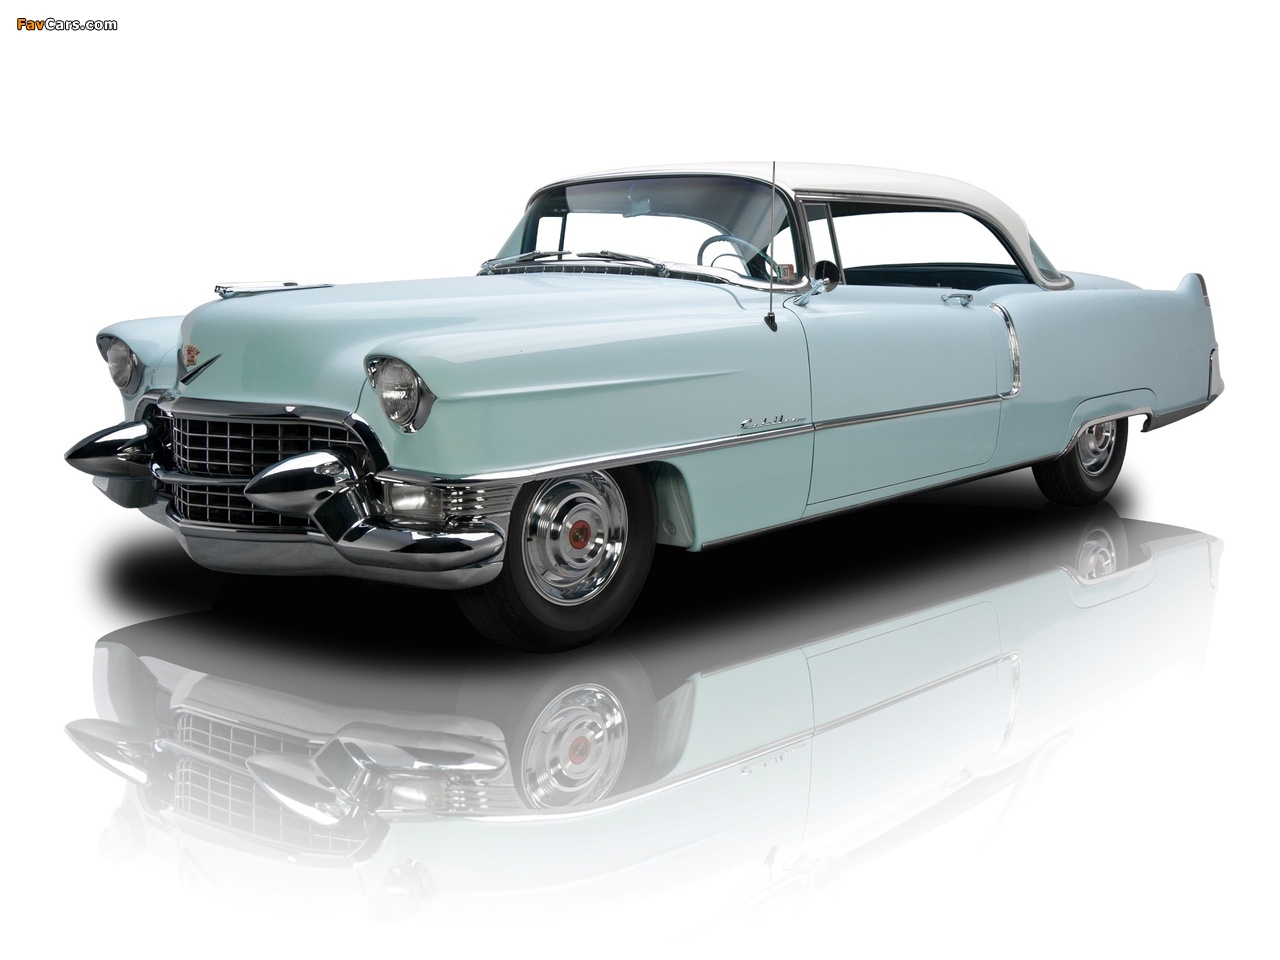 Pictures of Cadillac Sixty-Two Hardtop Coupe (6237(X)) 1955 (1280 x 960)